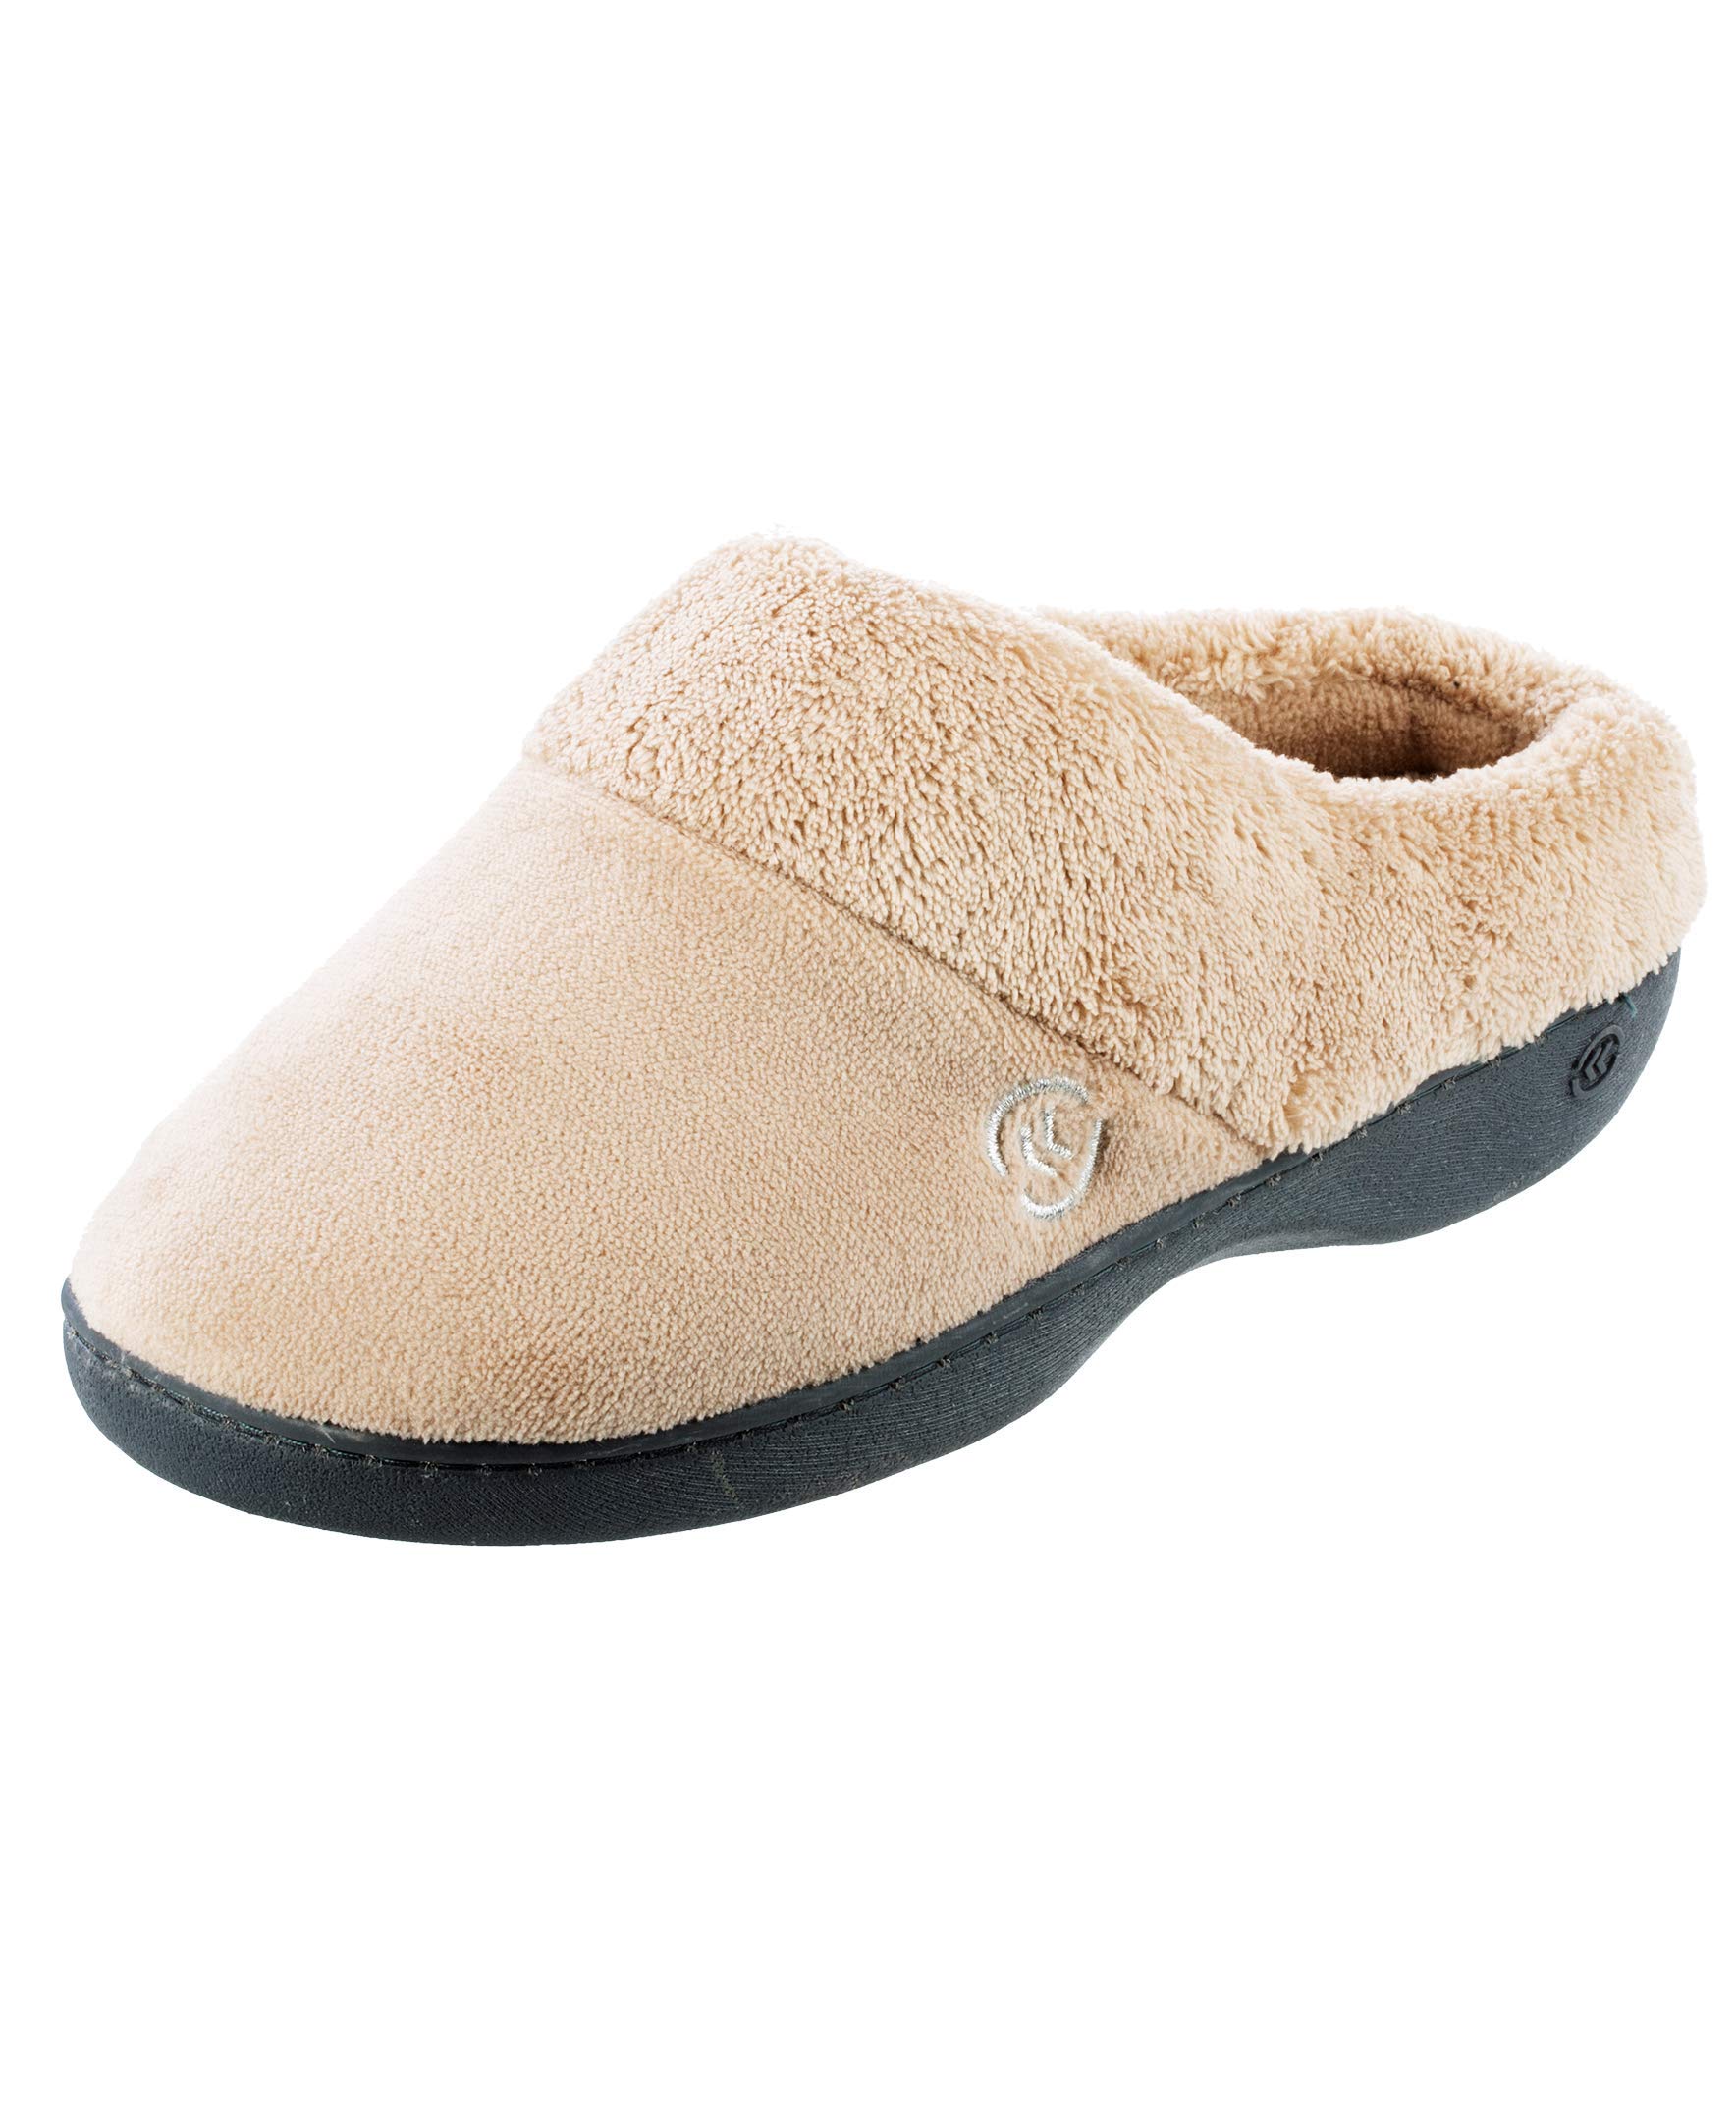 isotoner Women's Cozy Terry Hoodback Clog Slipper with Soft Memory Foam, Comfort Arch Support, and an Indoor/Outdoor Sole